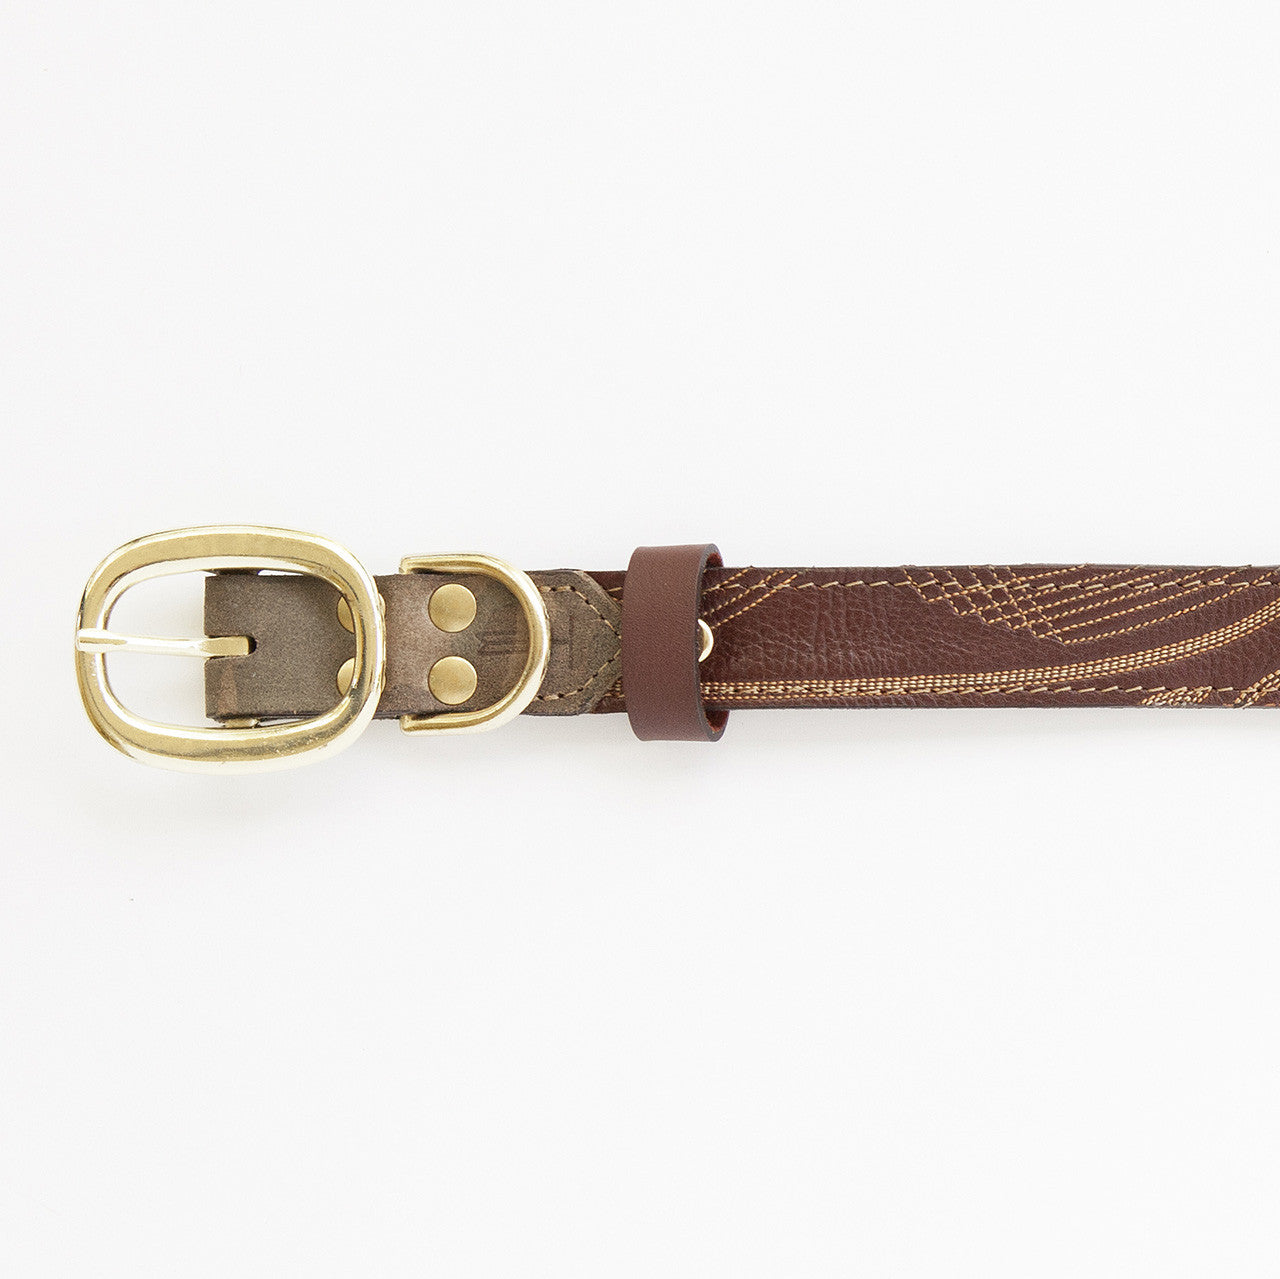 Camo Dog Collar with Brown Leather + Ivory Stitching (buckle)